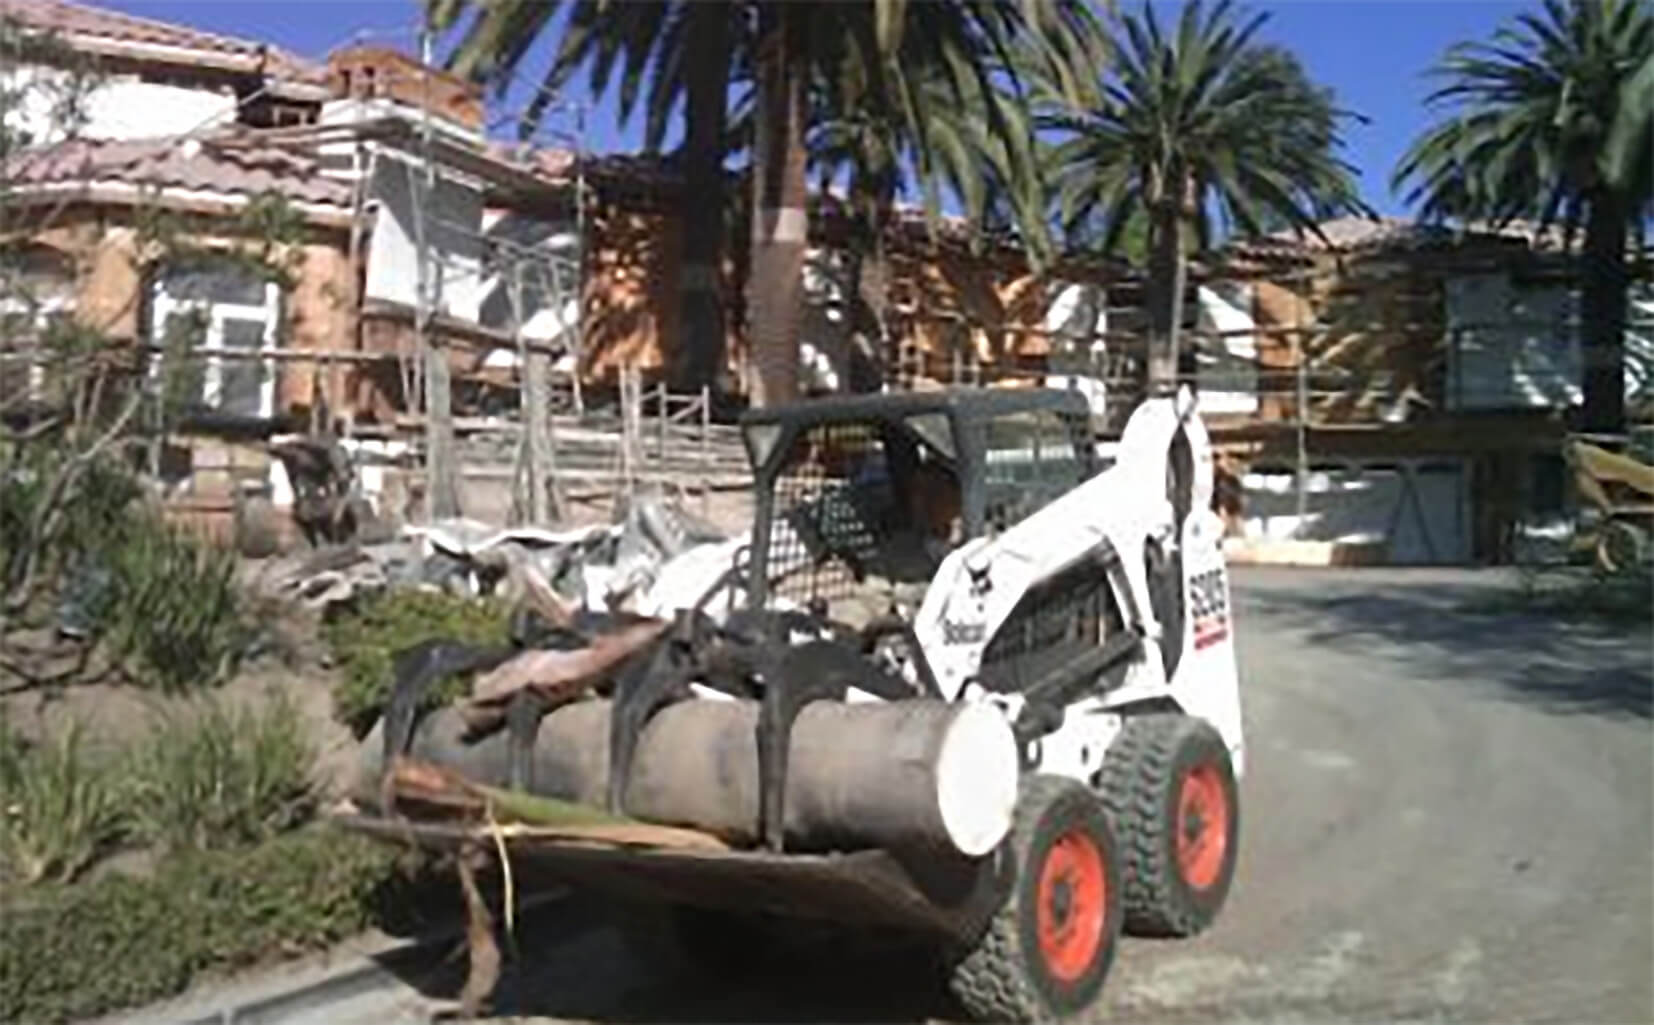 Palm Tree Removal-West Palm Beach Tree Trimming and Tree Removal Services-We Offer Tree Trimming Services, Tree Removal, Tree Pruning, Tree Cutting, Residential and Commercial Tree Trimming Services, Storm Damage, Emergency Tree Removal, Land Clearing, Tree Companies, Tree Care Service, Stump Grinding, and we're the Best Tree Trimming Company Near You Guaranteed!